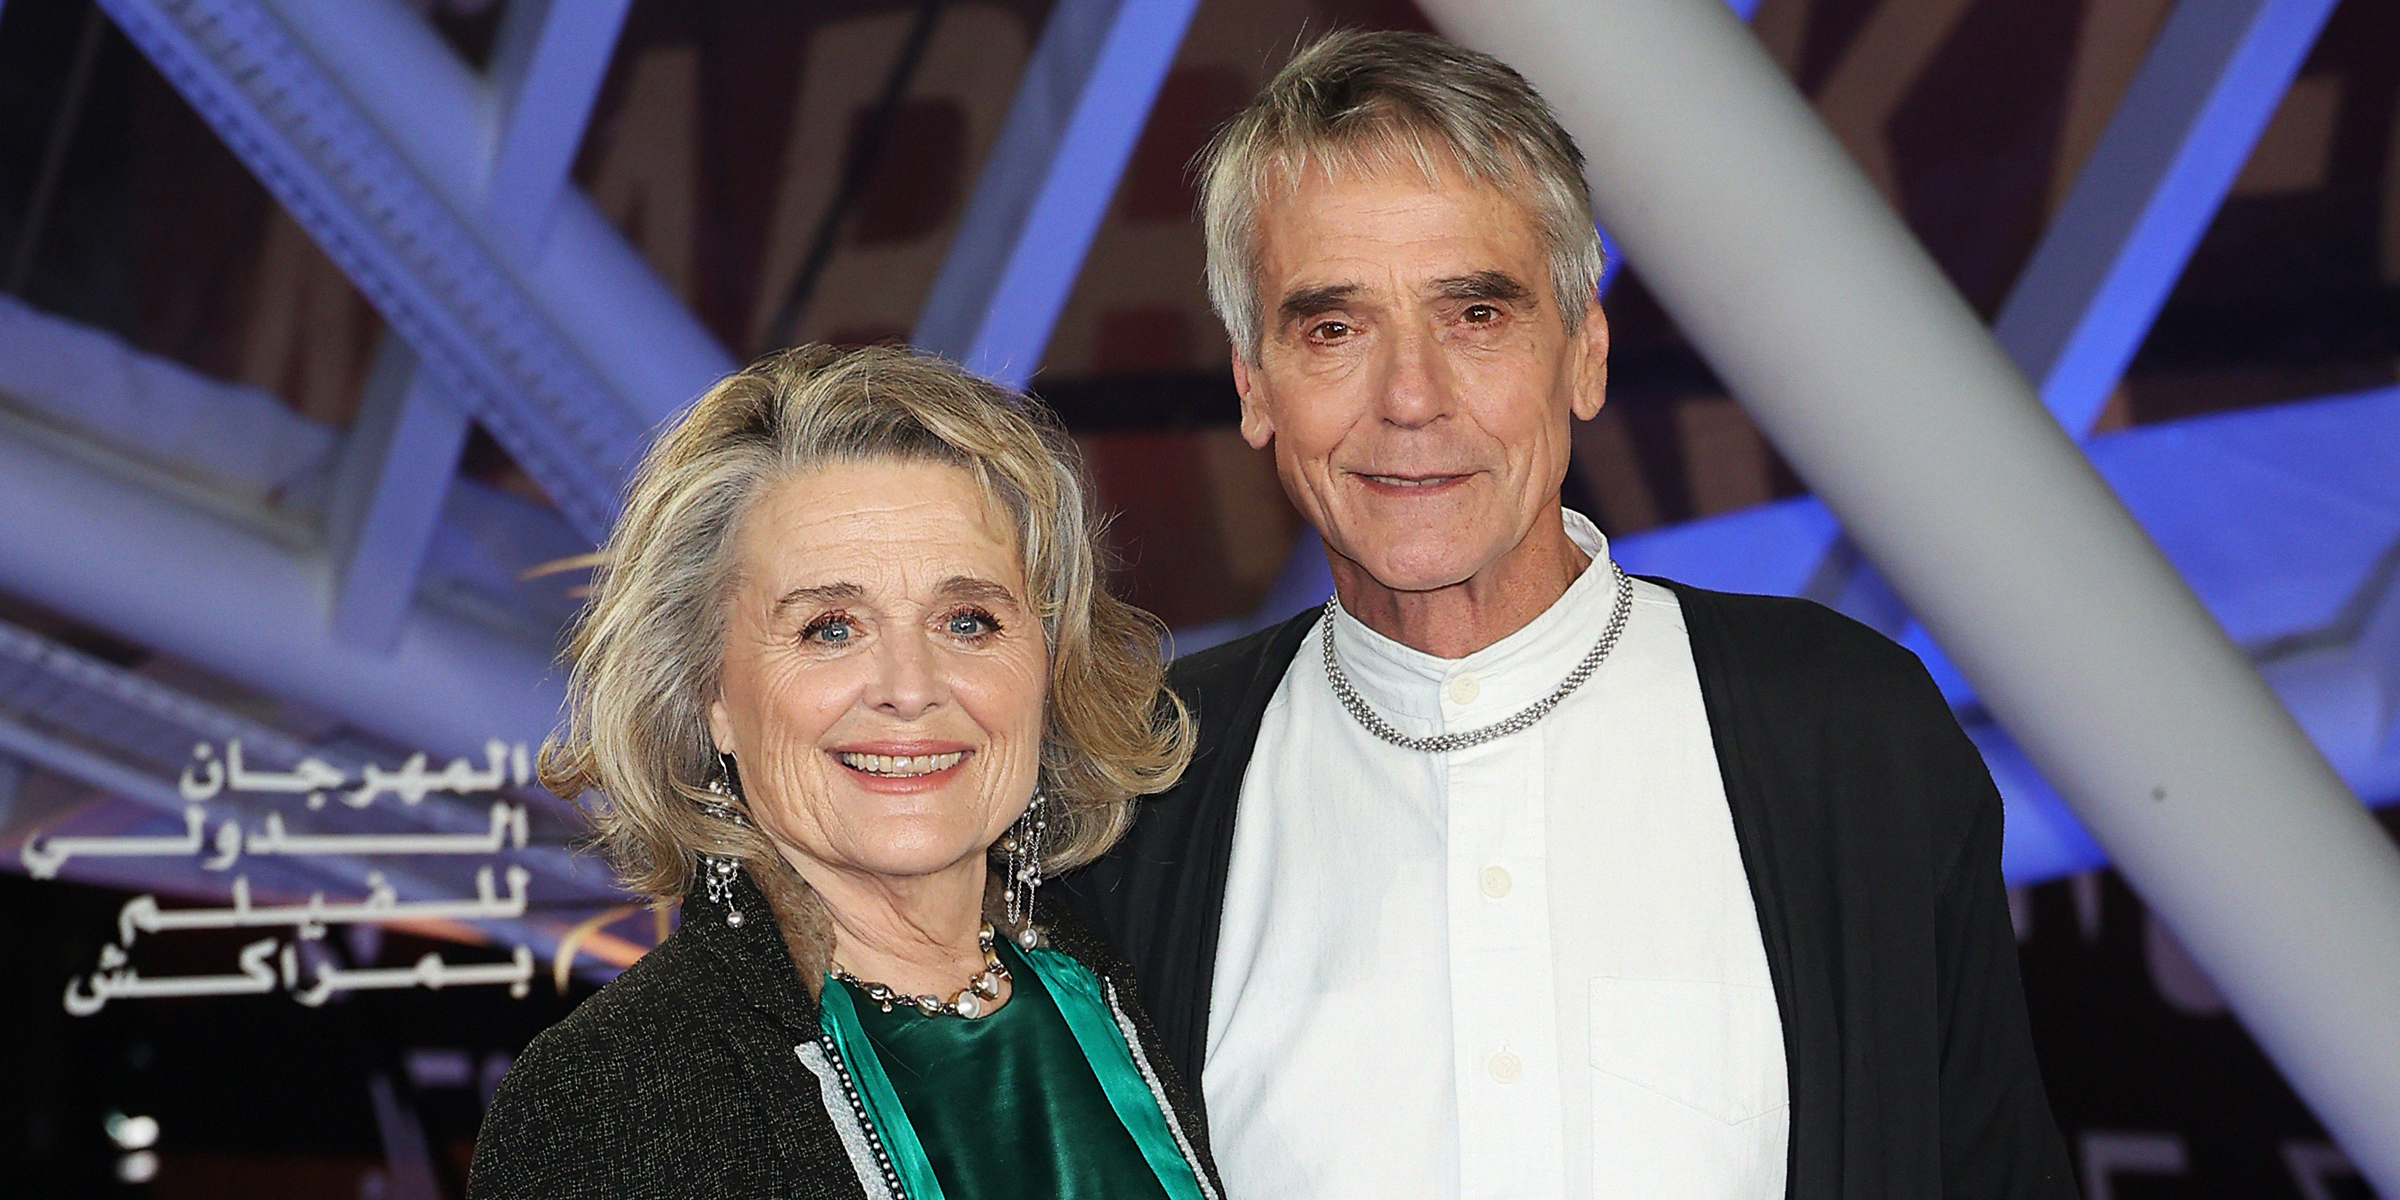 Jeremy Irons and Sinéad Cusack | Source: Getty Images